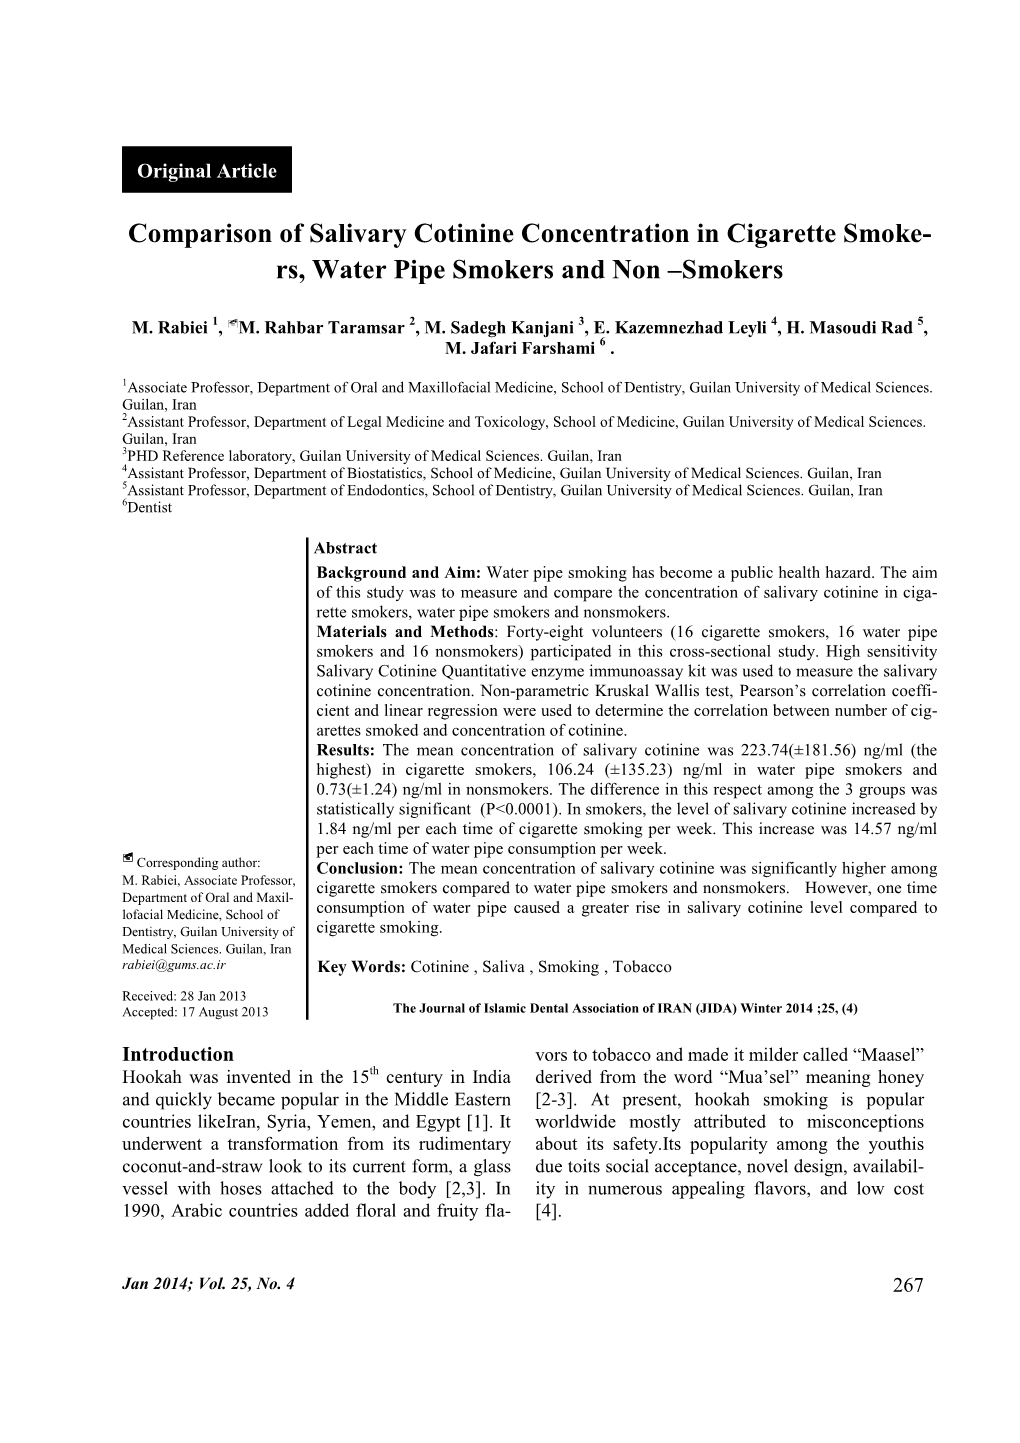 Comparison of Salivary Cotinine Concentration in Cigarette Smoke- Rs, Water Pipe Smokers and Non –Smokers